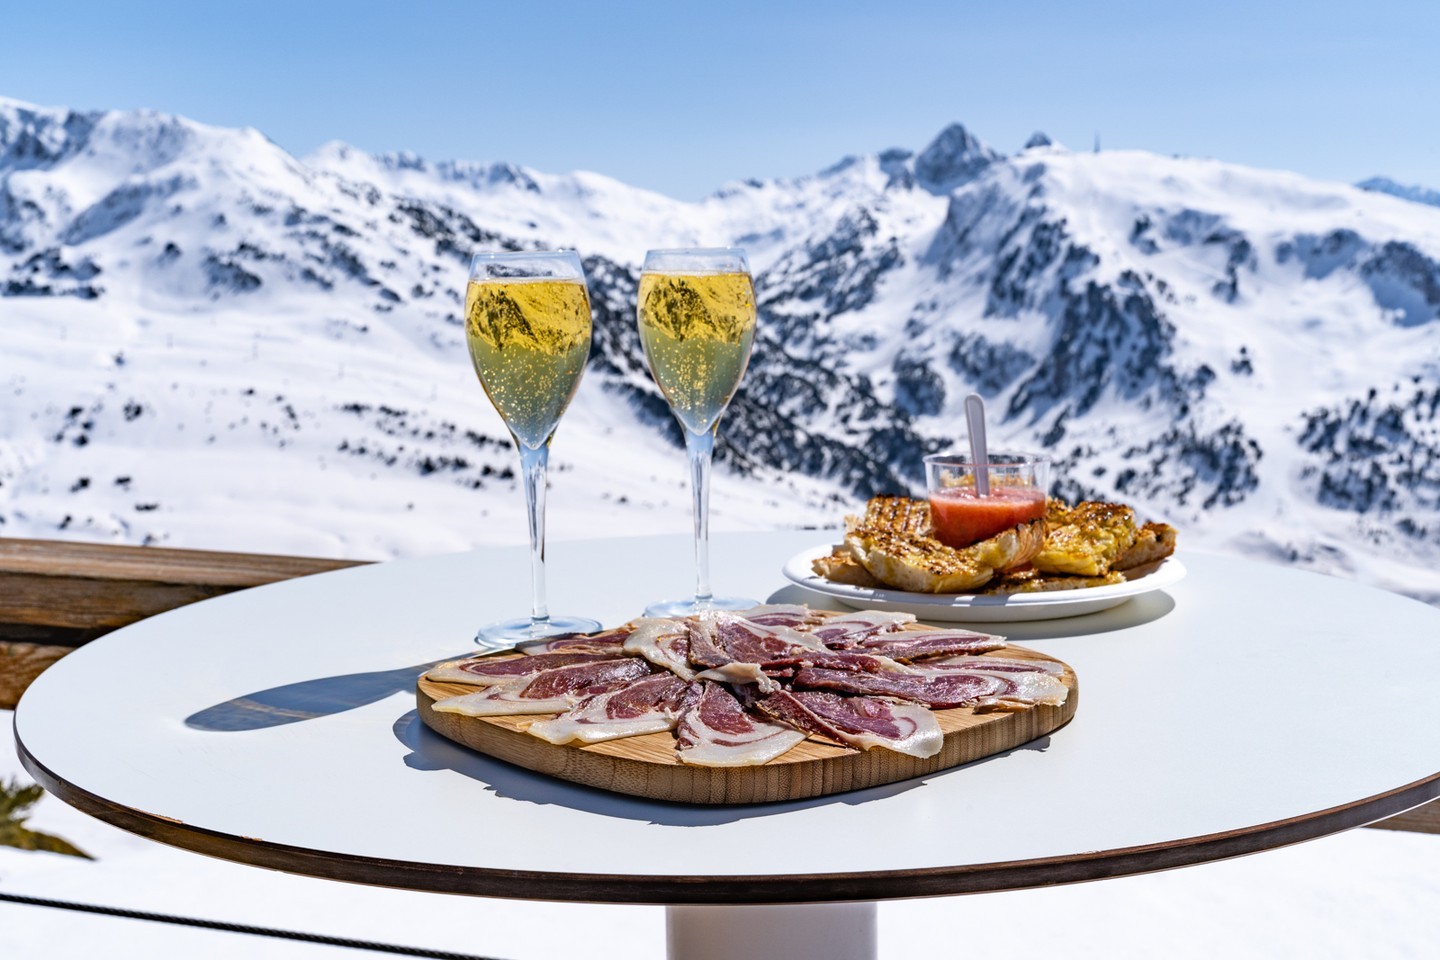 In Baqueira Beret you will find a great variety of gastronomic offer among the 25 restaurants distributed throughout the Resort